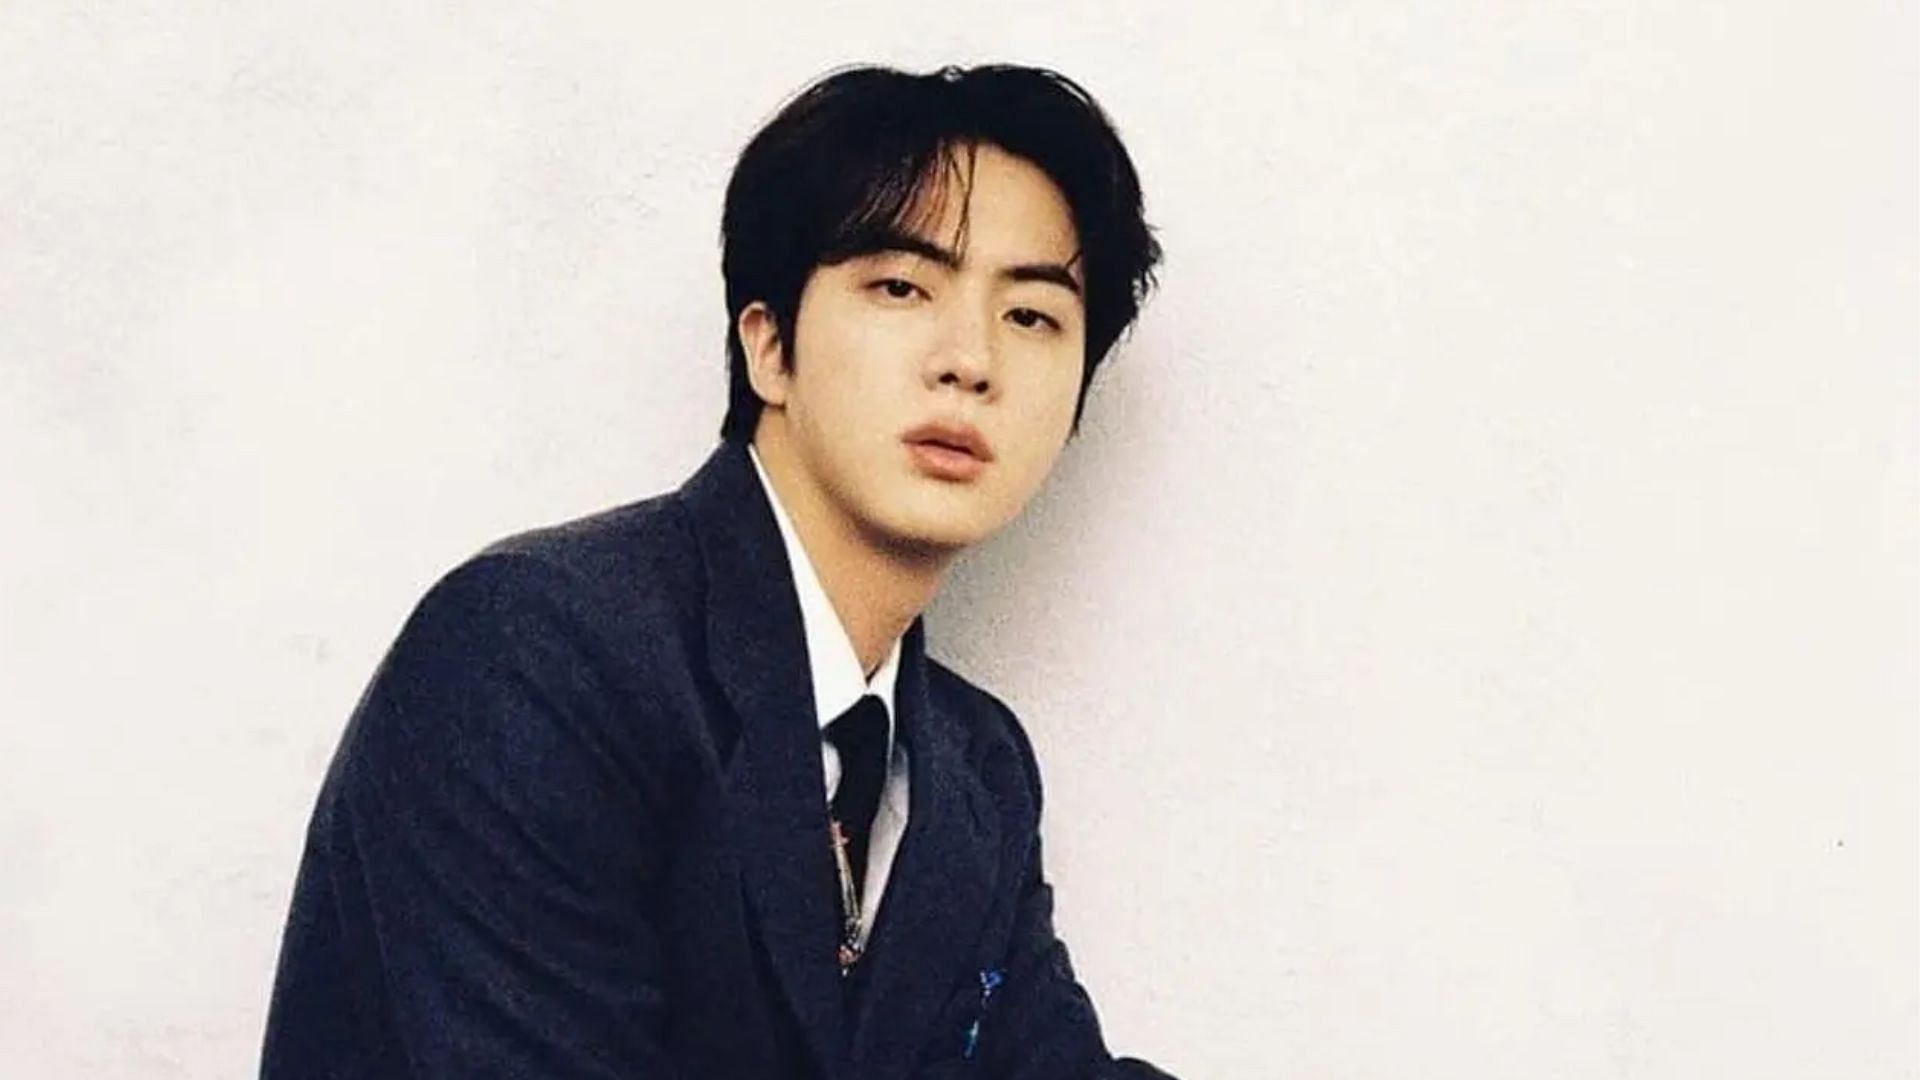 BTS JIN to Make His Acting Debut Soon?